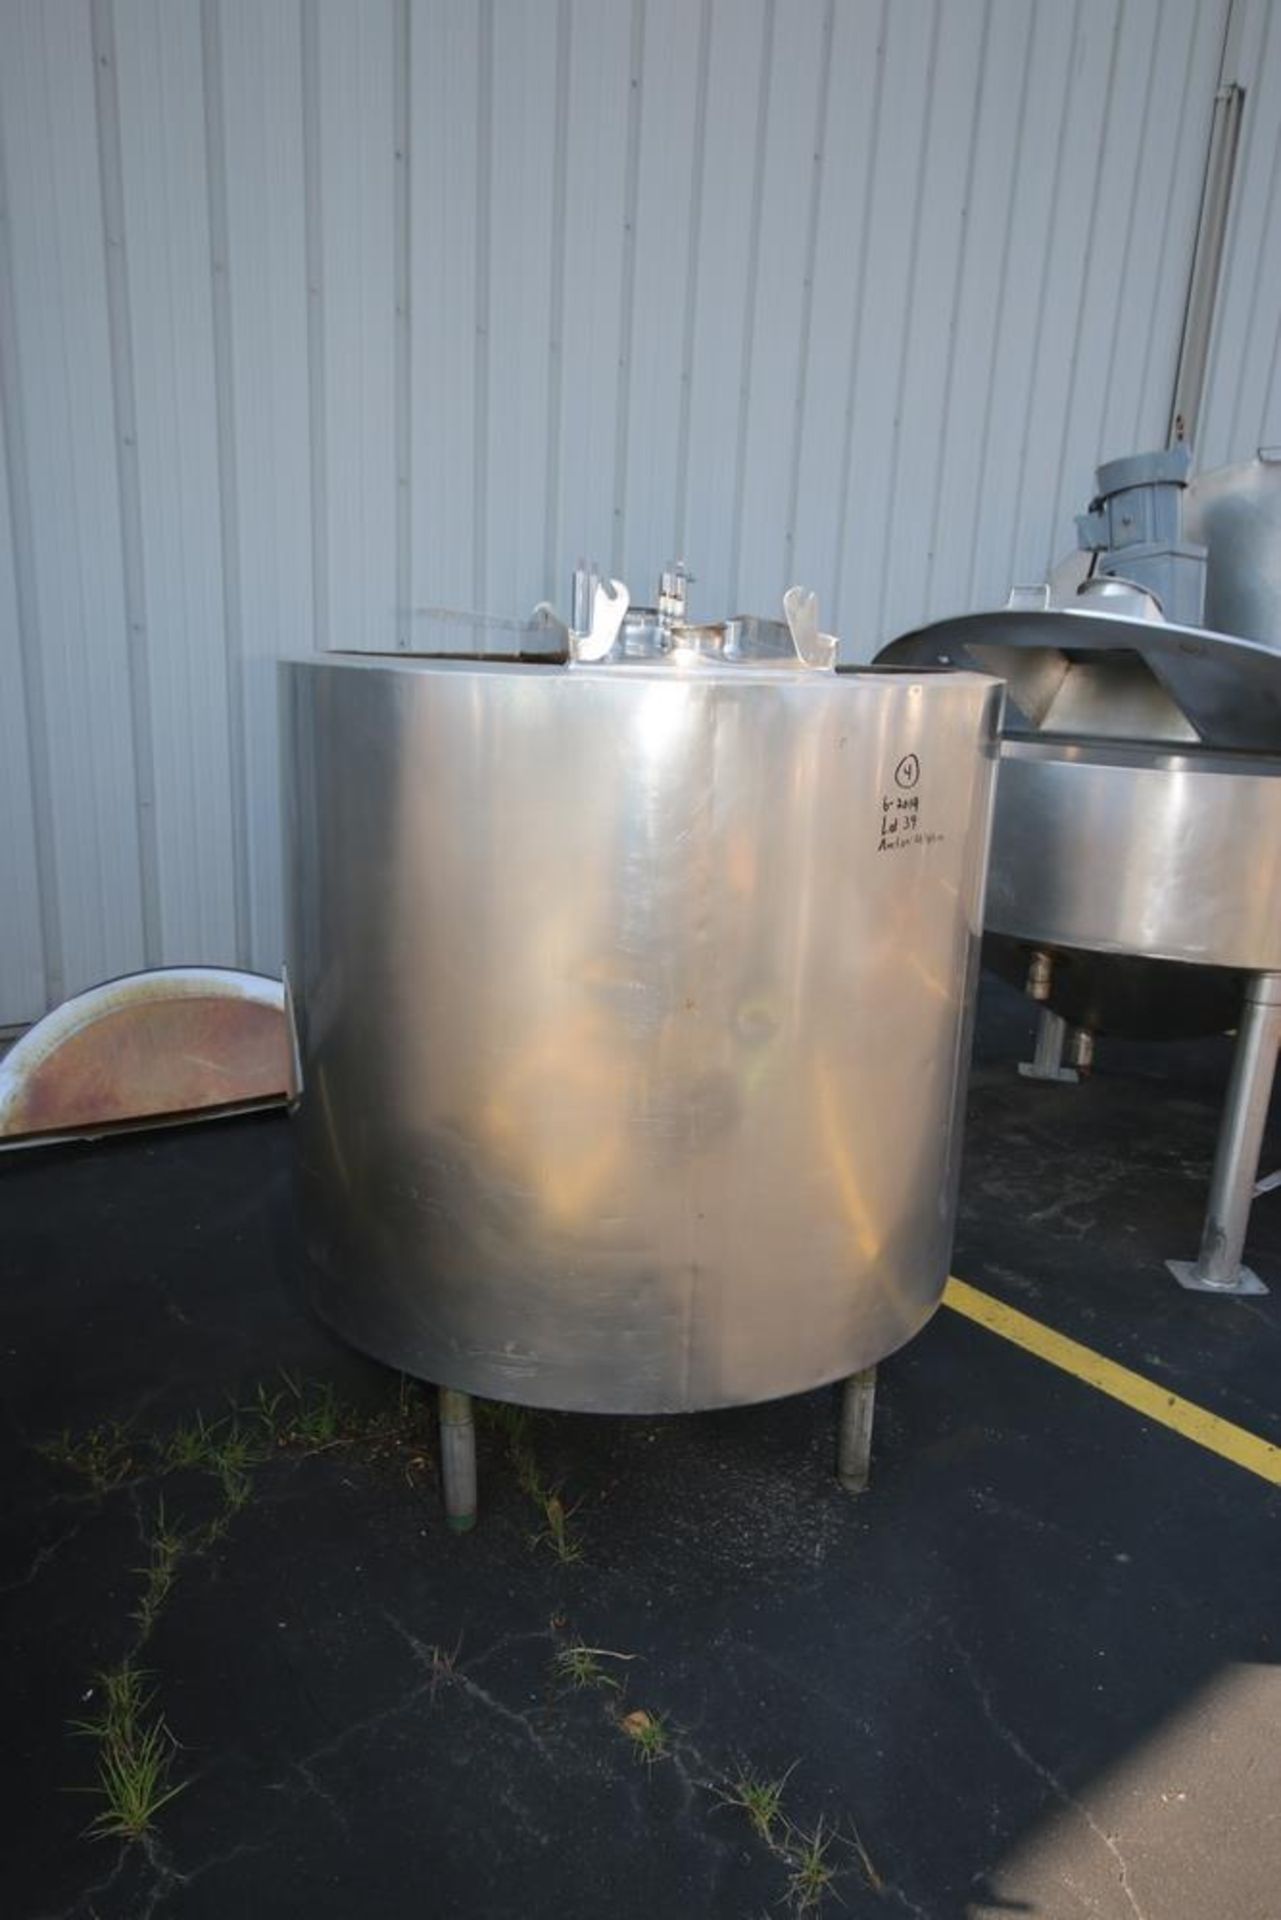 Jenson S/S 300 Gal. Jacketed Vertical Tank, S/N CRST-101-DR, with S/S Slope Bottom, Mounted on S/S - Image 2 of 5